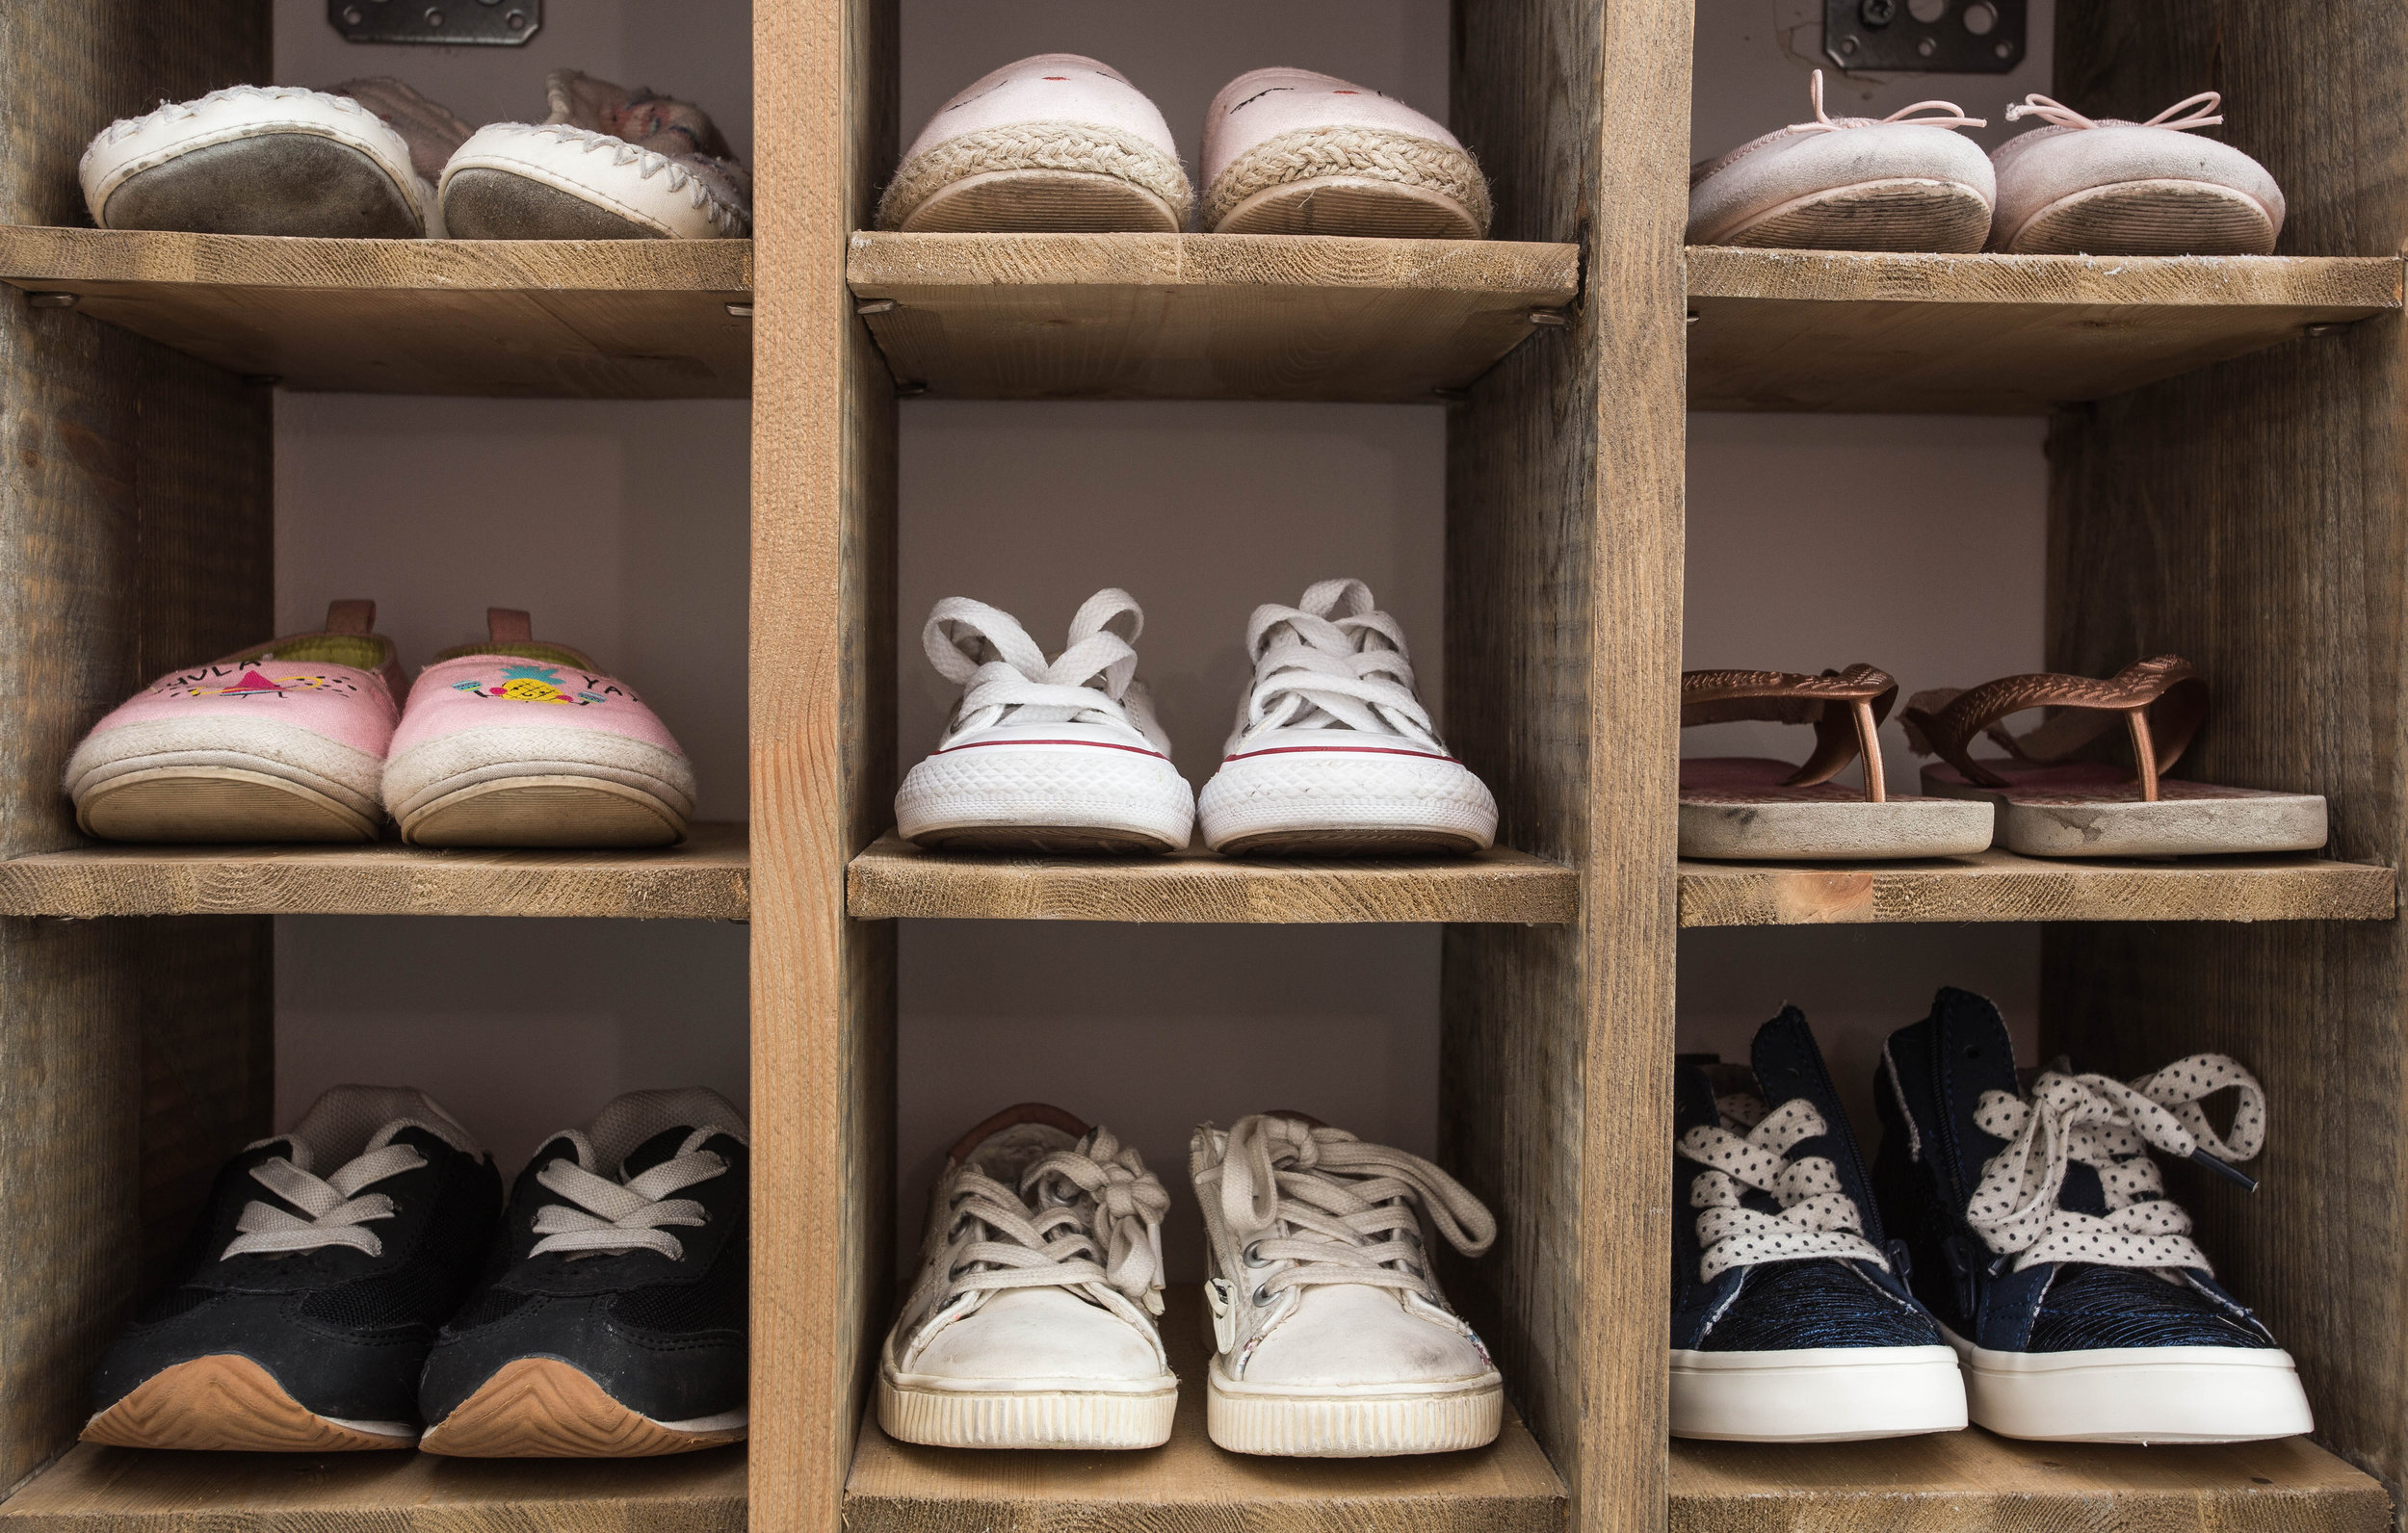 Ways to Organize Your Shoe Collection | Aaron's Blog